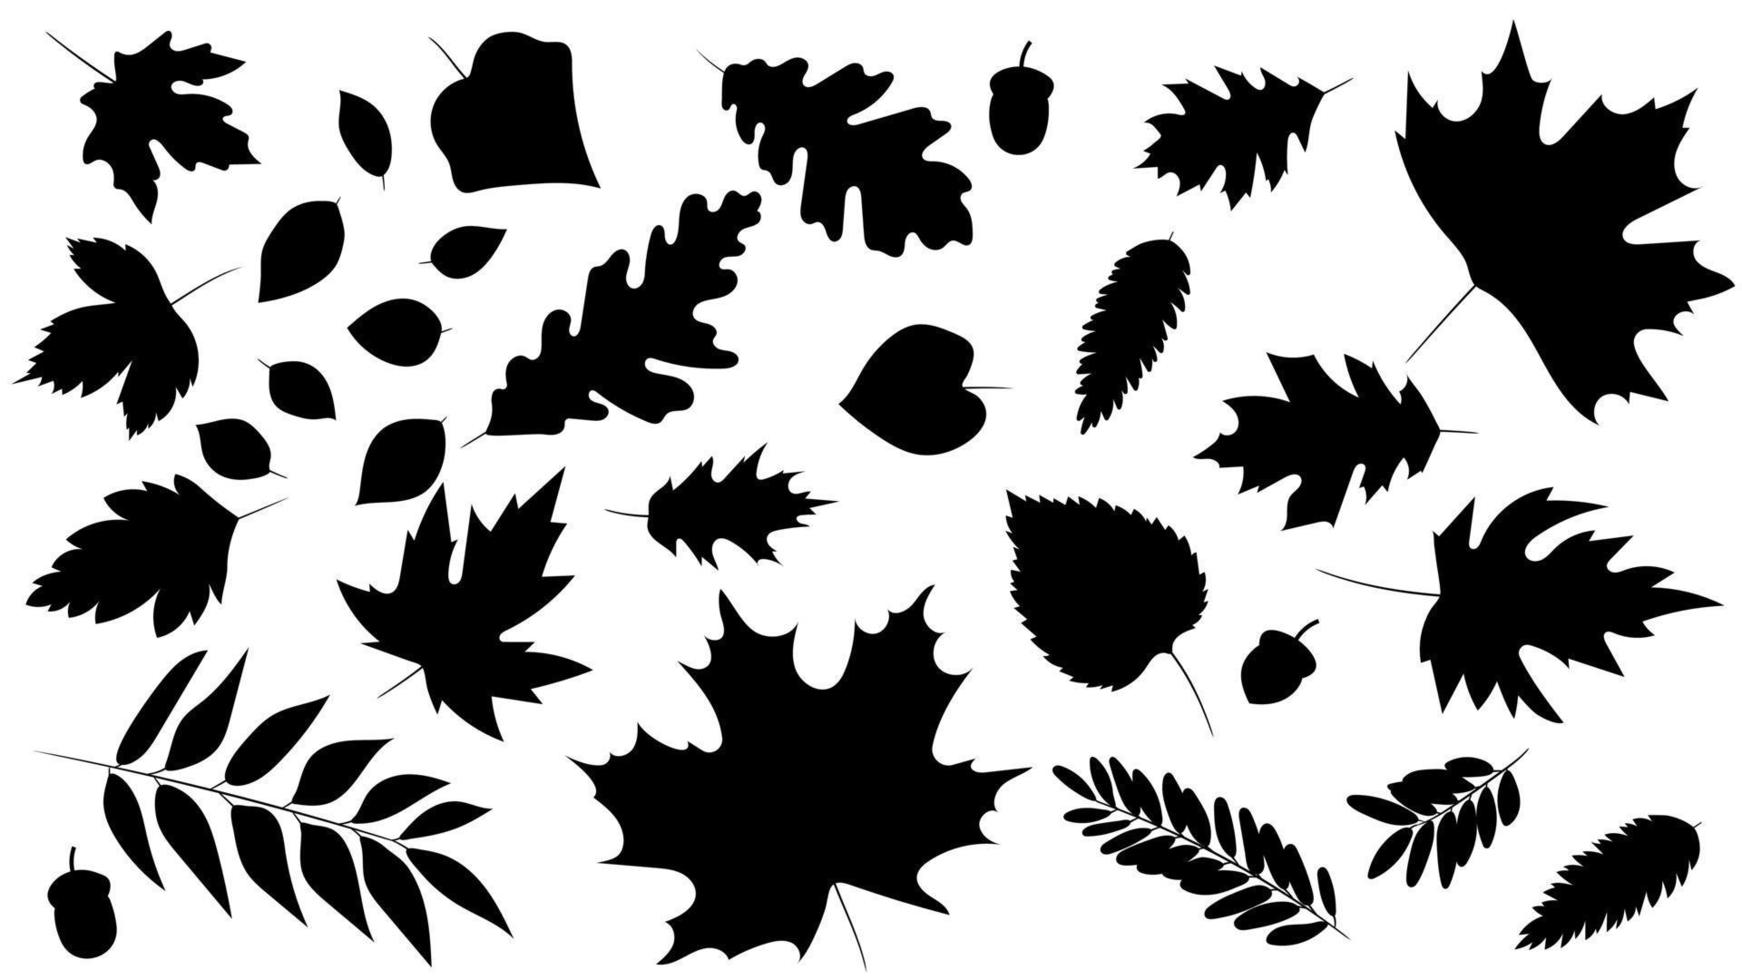 Big set of leaves from different kind of trees isolated. Set of black autumn leaf oak, maple, rowan and acorns. Realistic silhouette style. Vector illustration. Set of  foliage.